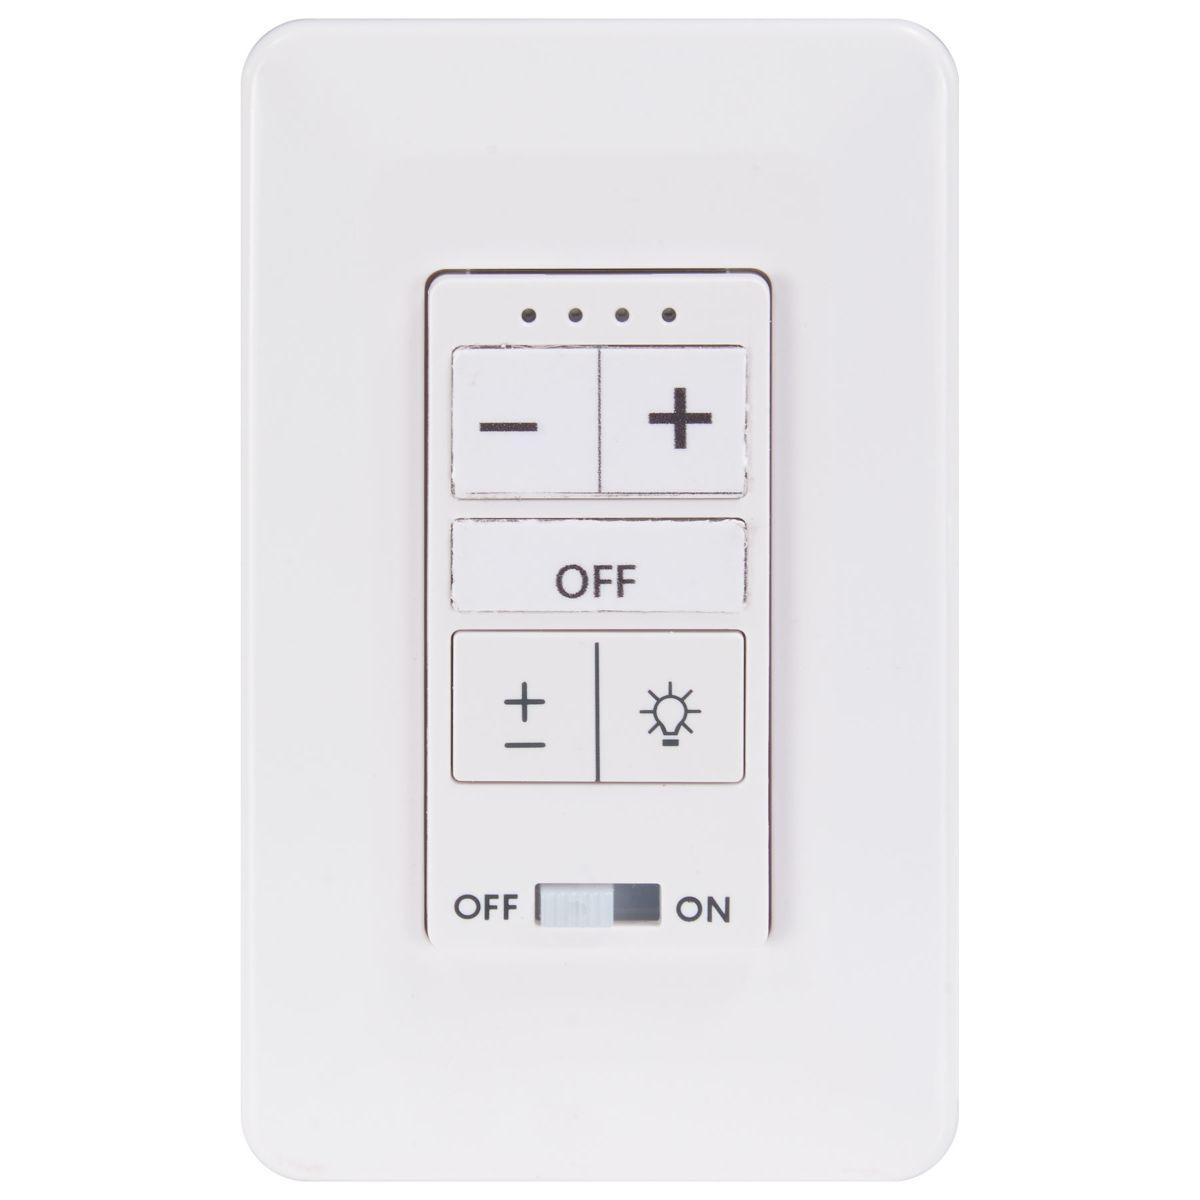 Watt 4-Speed Ceiling Fan And Light Wall Control, White Finish - Bees Lighting